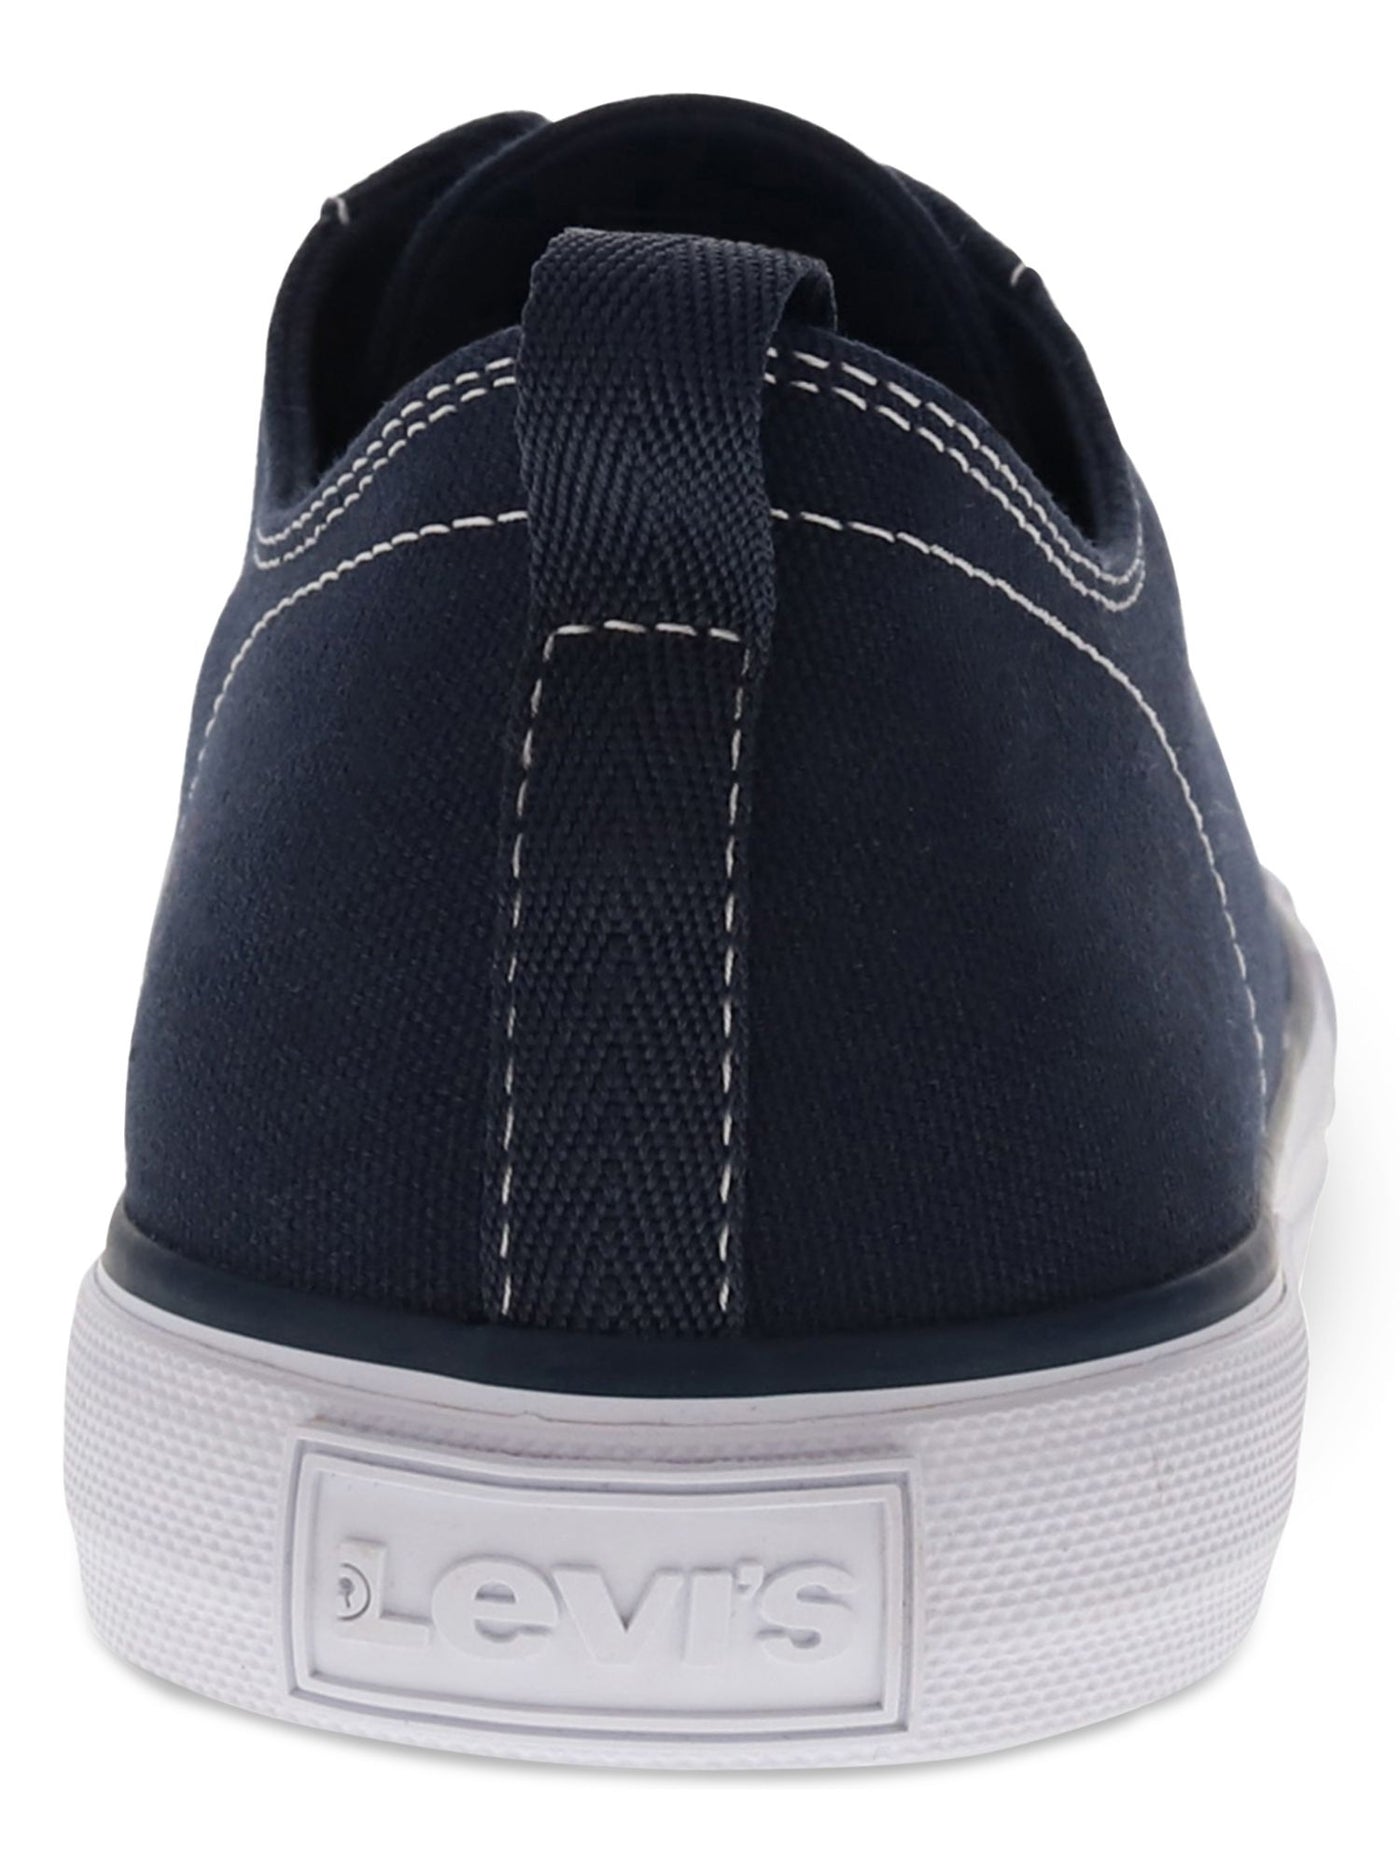 LEVI'S Mens Navy Removable Insole Cushioned Anikin Round Toe Lace-Up Sneakers Shoes 7.5 M